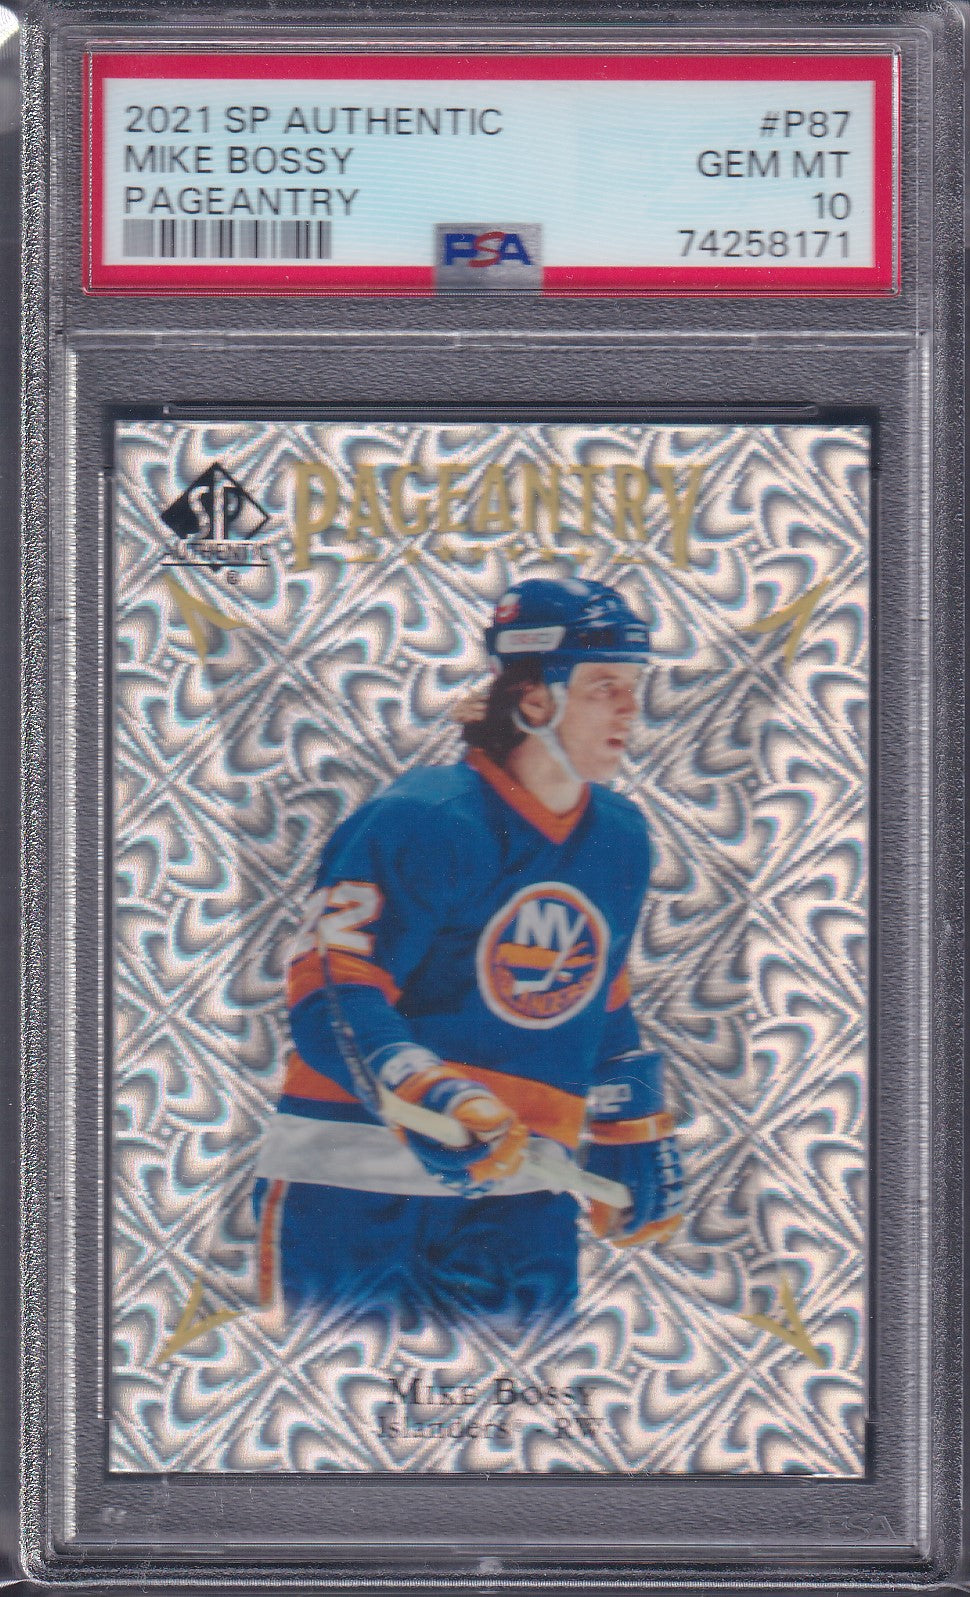 MIKE BOSSY - 2021 SP Authentic Pageantry #P87, PSA 10